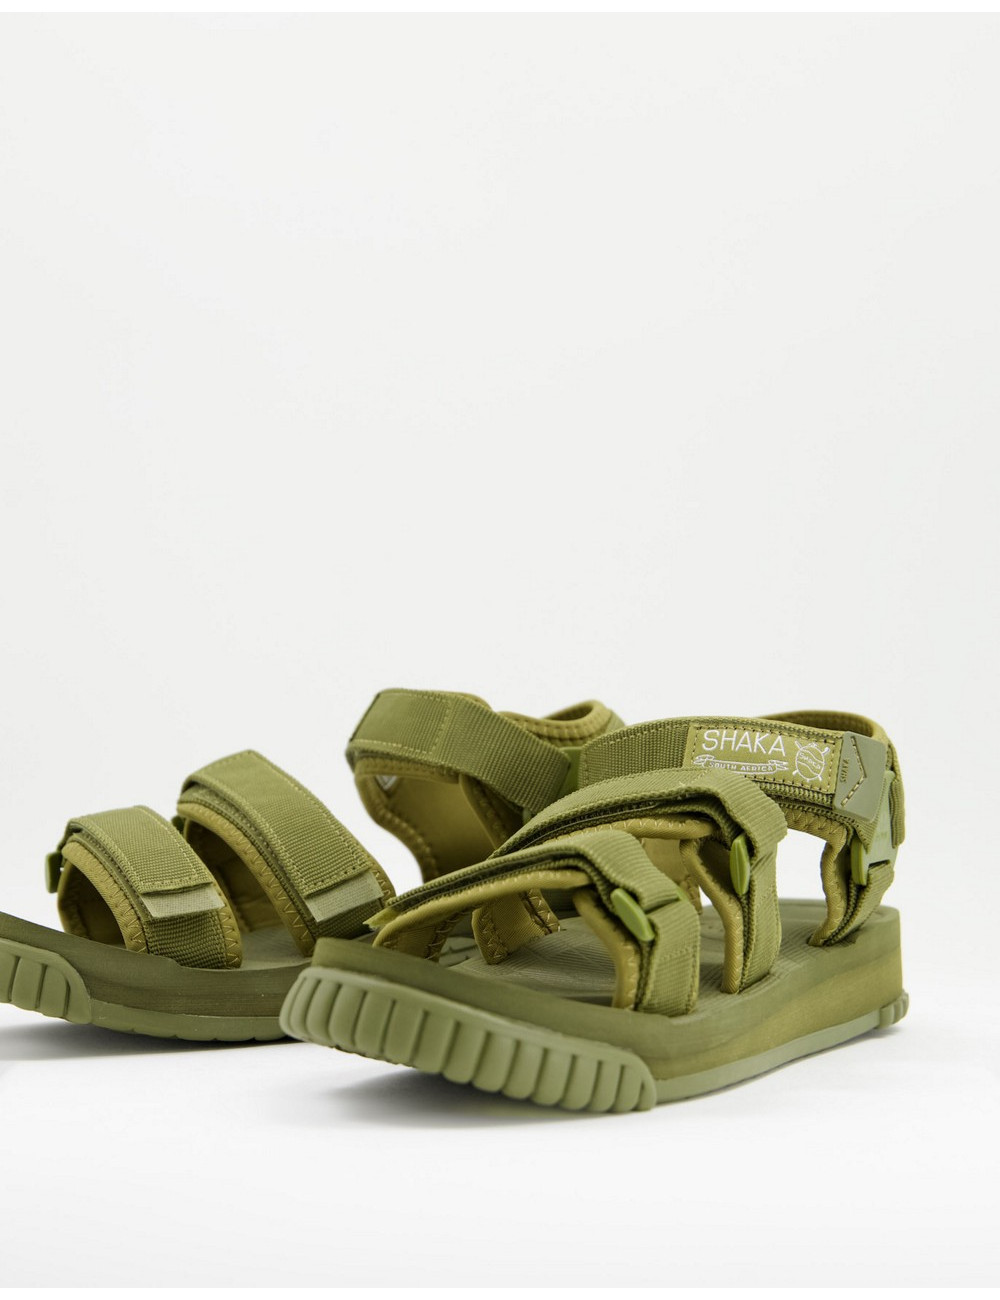 Shaka neo bungy sandals in...